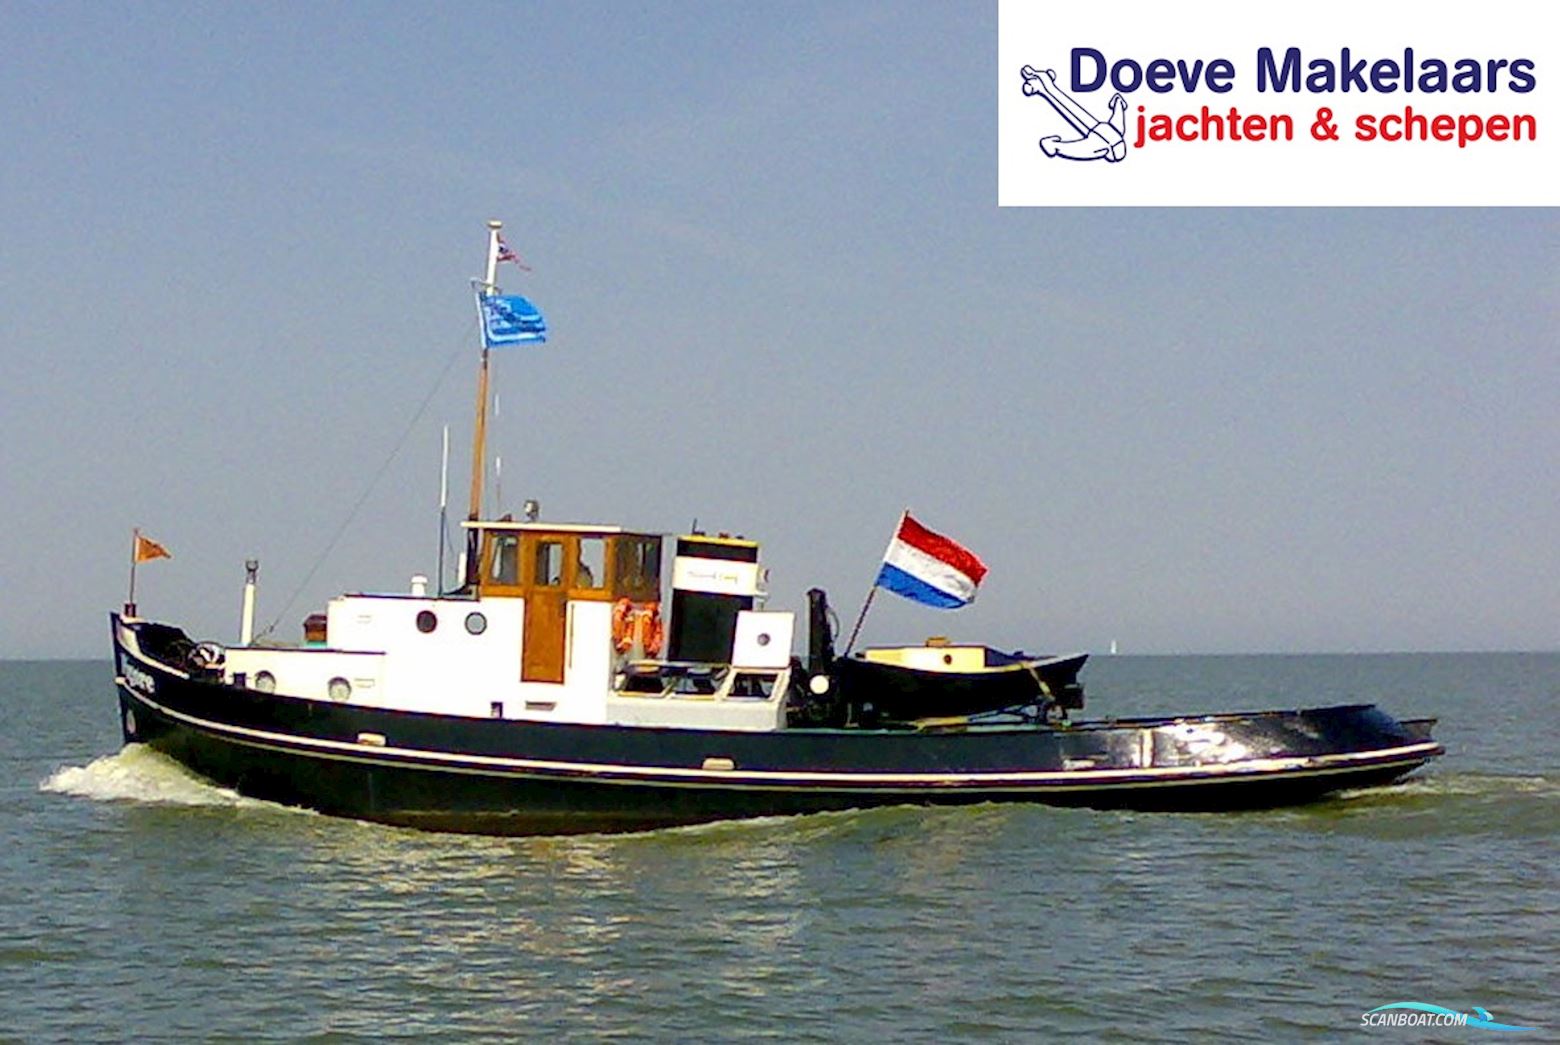 Sleepboot Figore Met Cbb Live a board / River boat 1939, with Industrie<br />3VD6 Lucht Gestart engine, The Netherlands